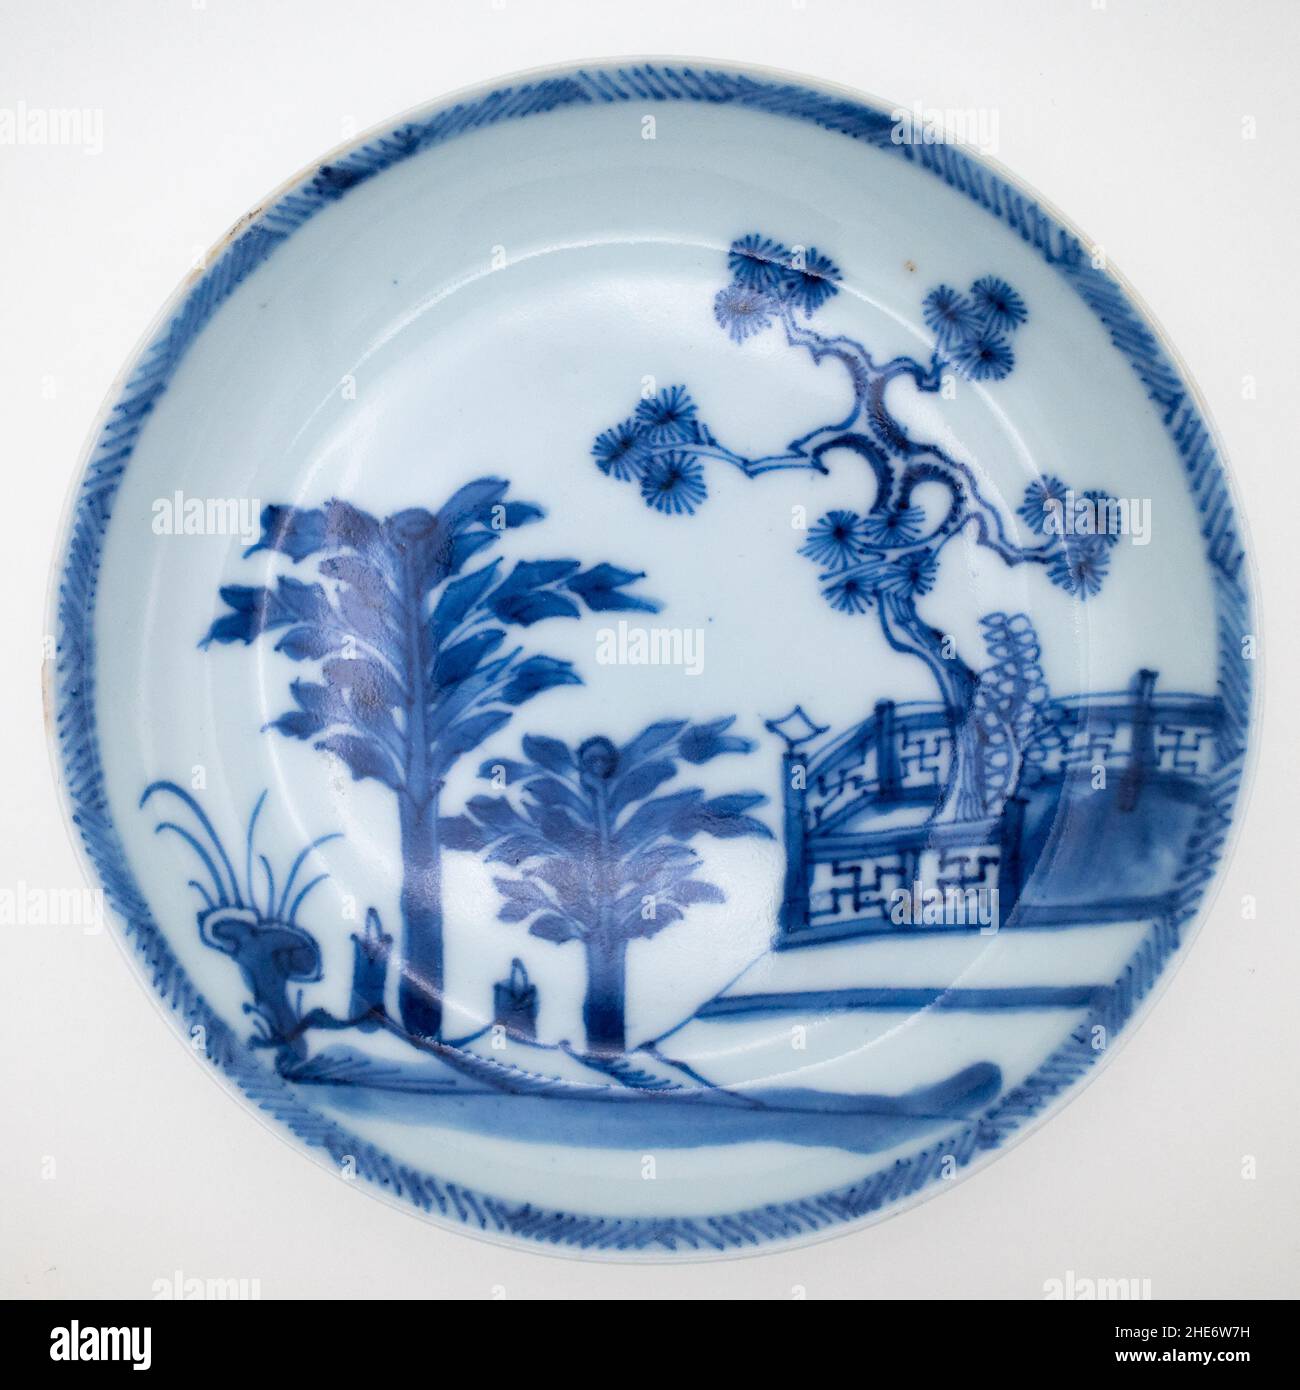 Antique Chinese 18th Century Blue and White Saucer Dish Wih a Scene Featuring Pine Tree Behind a Fence, Plantains and Lingzhi Fungus Stock Photo